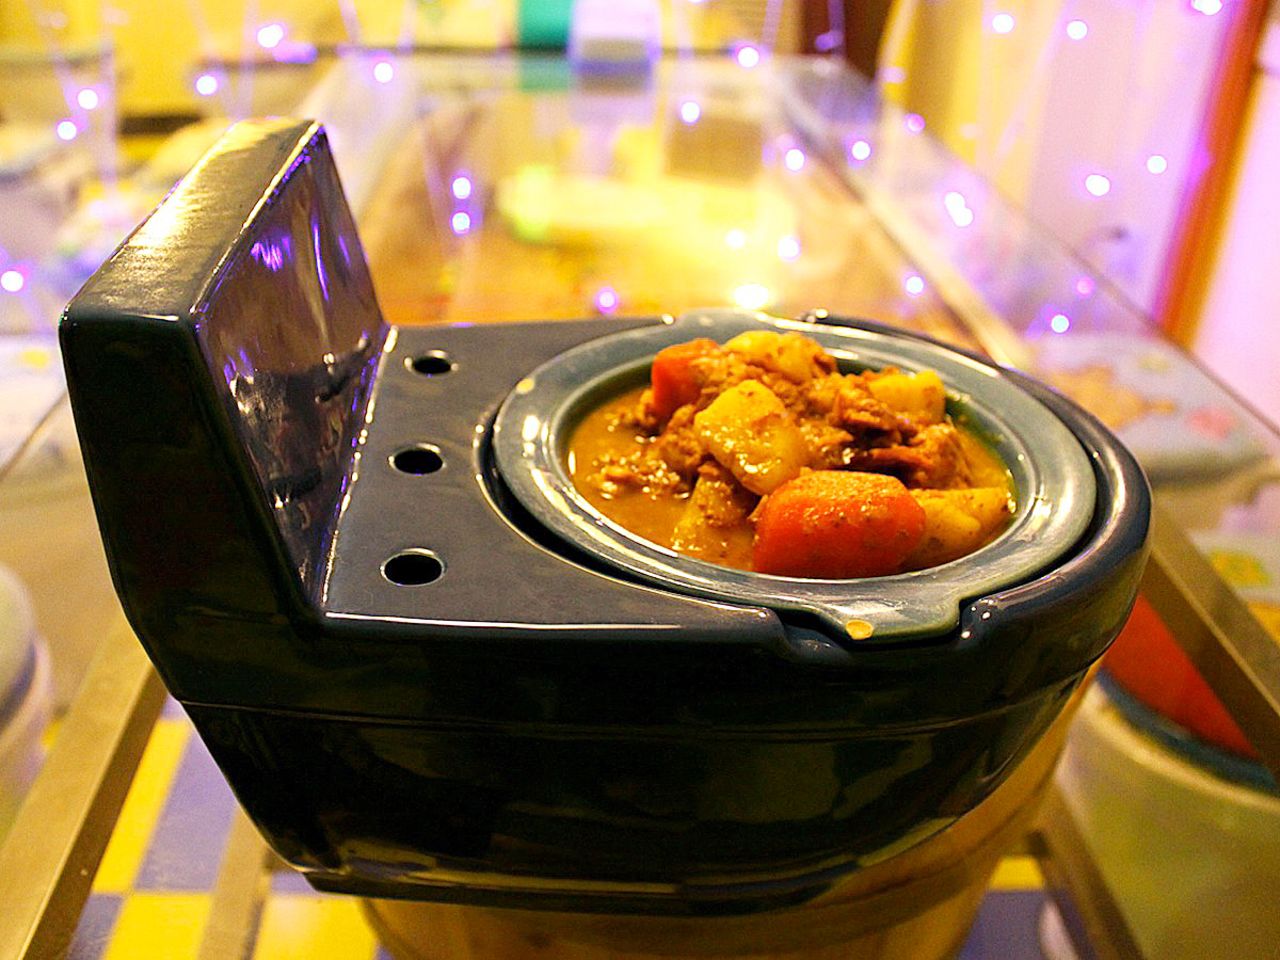 At Beijing's toilet-themed restaurant, all 50 seats are made from actual toilet bowls, topped with cartoon-themed warmers. This particular dish? Beef curry in a toilet-shaped bowl. "The food wasn't really that good," says iReporter Alainsojourn. At least he walked away with these photos.<a href="http://travel.cnn.com/gallery-inside-beijings-toilet-restaurant-690726" target="_blank"> Read more: Inside Beijing's toilet restaurant</a>